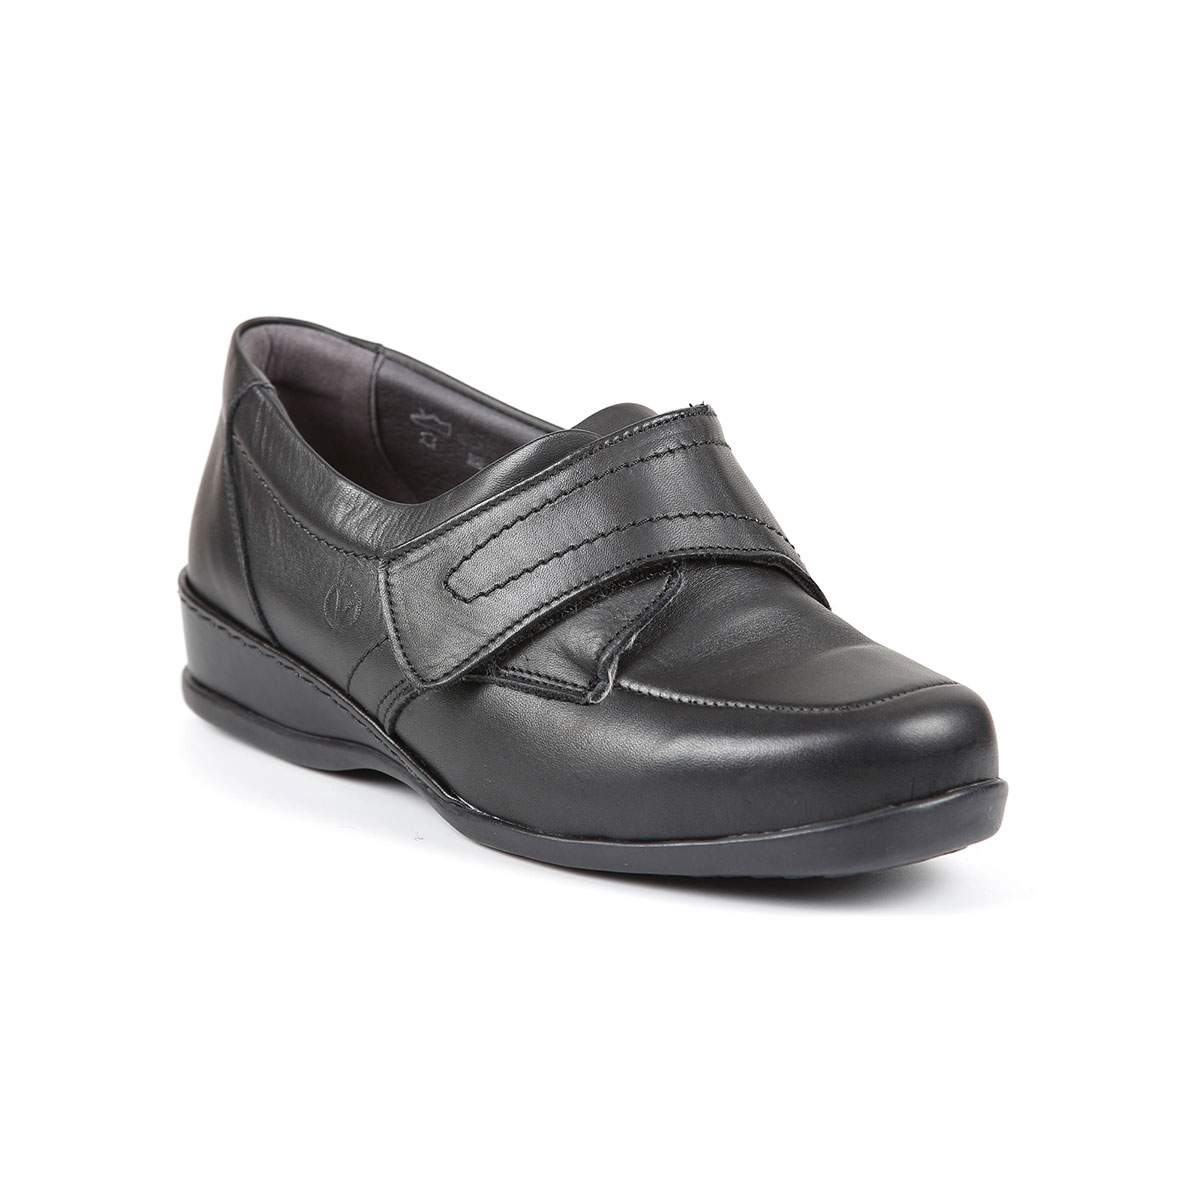 Sandpiper Wardale Shoes